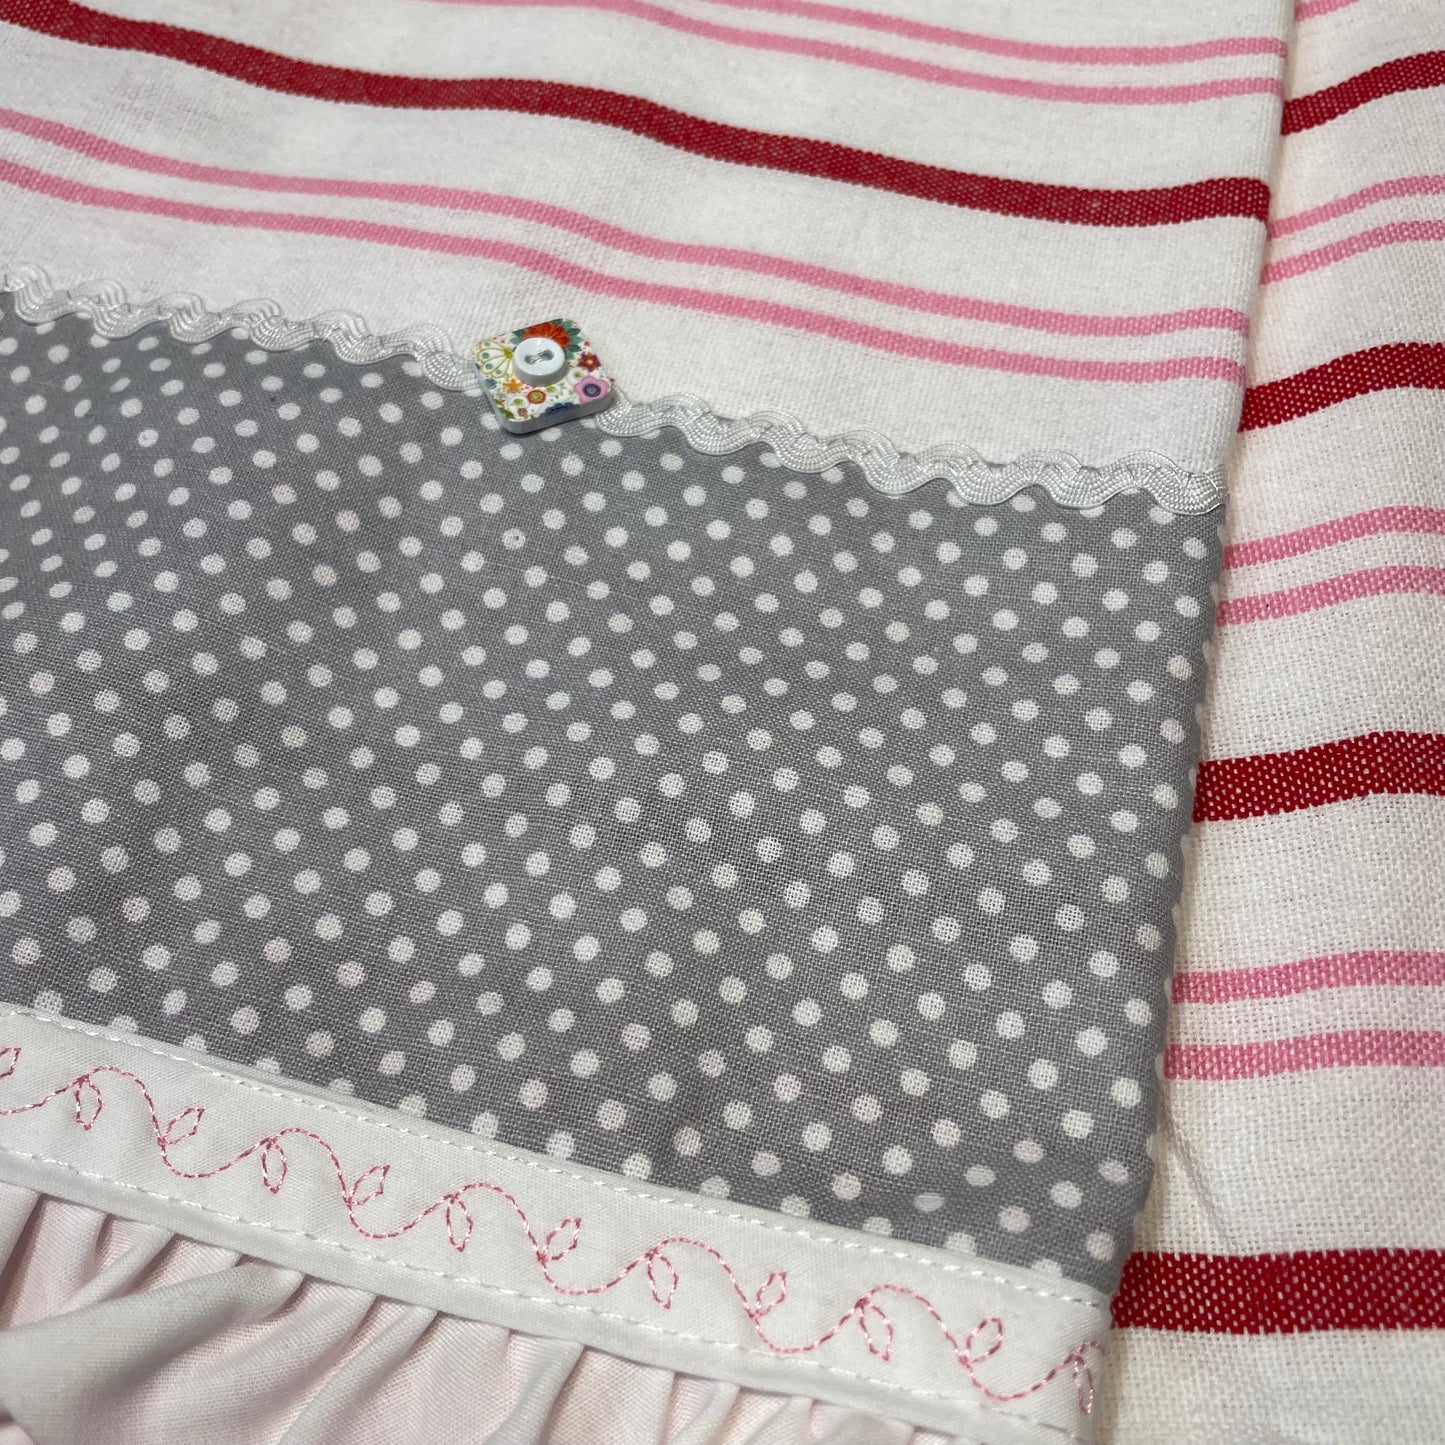 Cute red, white and pink towel with handcrafted quilting cotton accents. Featuring red Ric Rac, white Ric Rac and and heart shaped button. Part of a mix and match collection of coordinated kitchen and bath decor. Browse your favorites and be sure to follow along on the Home Stitchery Decor YouTube Channel